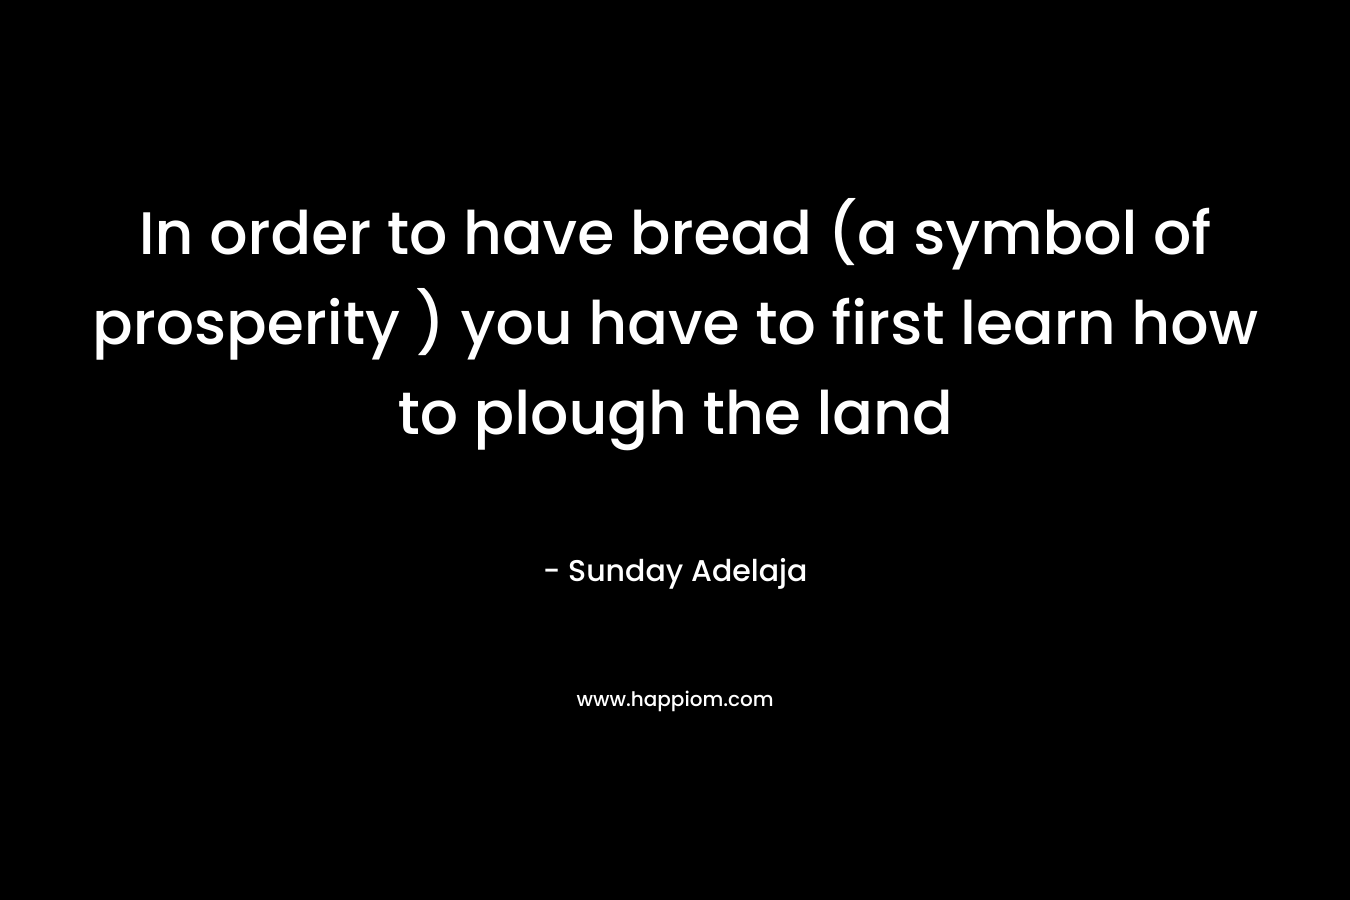 In order to have bread (a symbol of prosperity ) you have to first learn how to plough the land